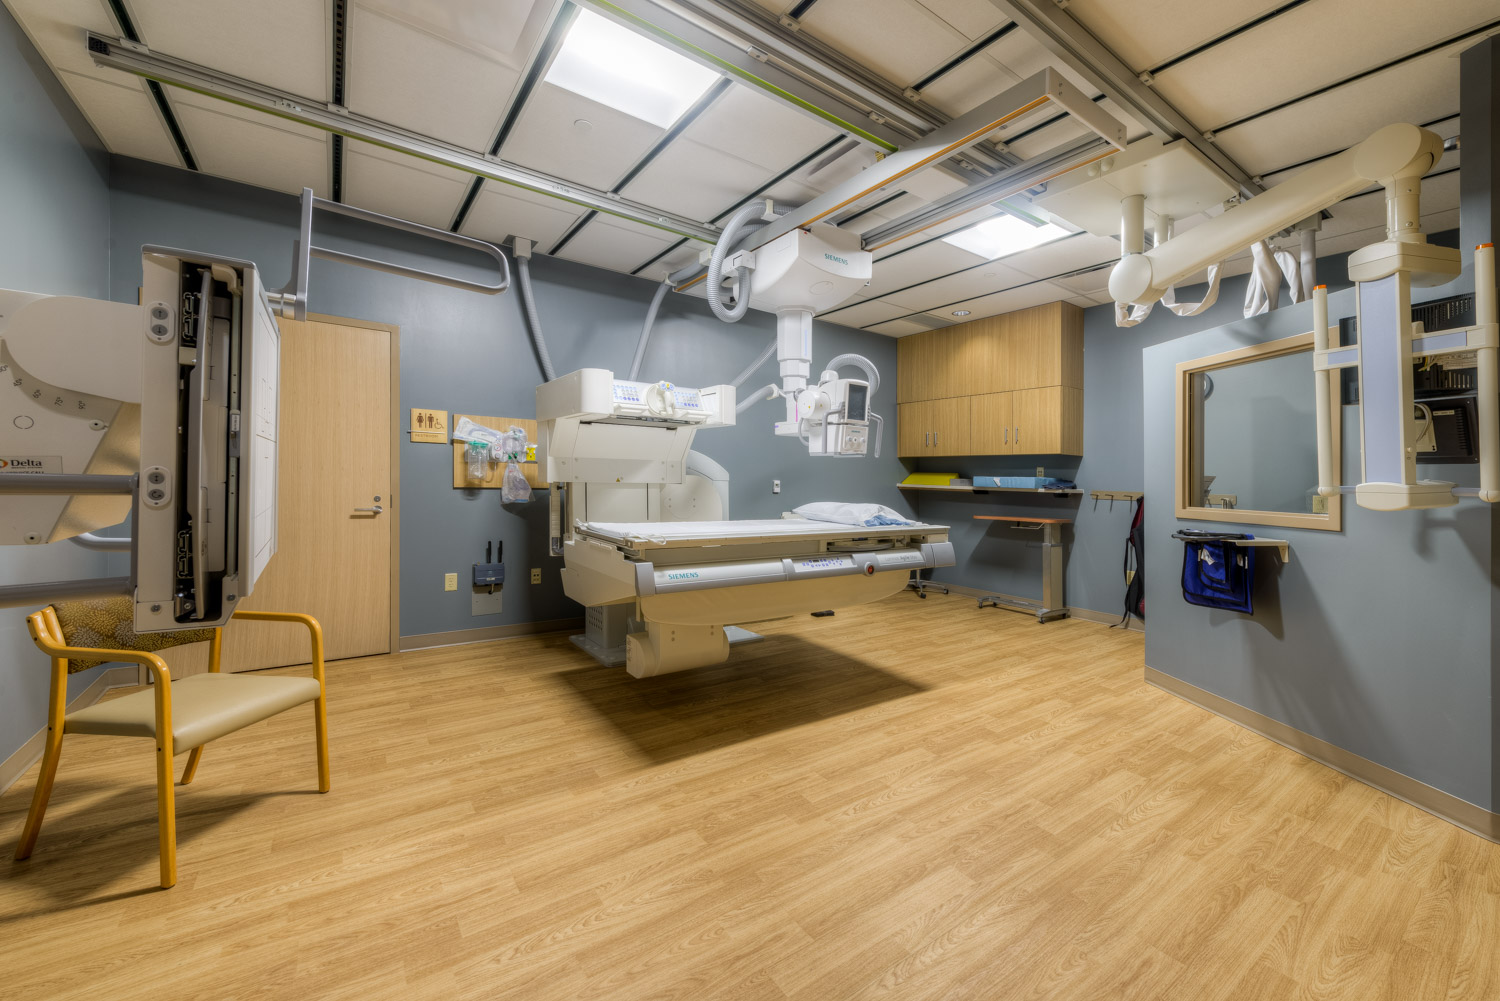 20160918_westernwisconsinhealth_replacementhospital_0648_hdr_150dpi_1500px